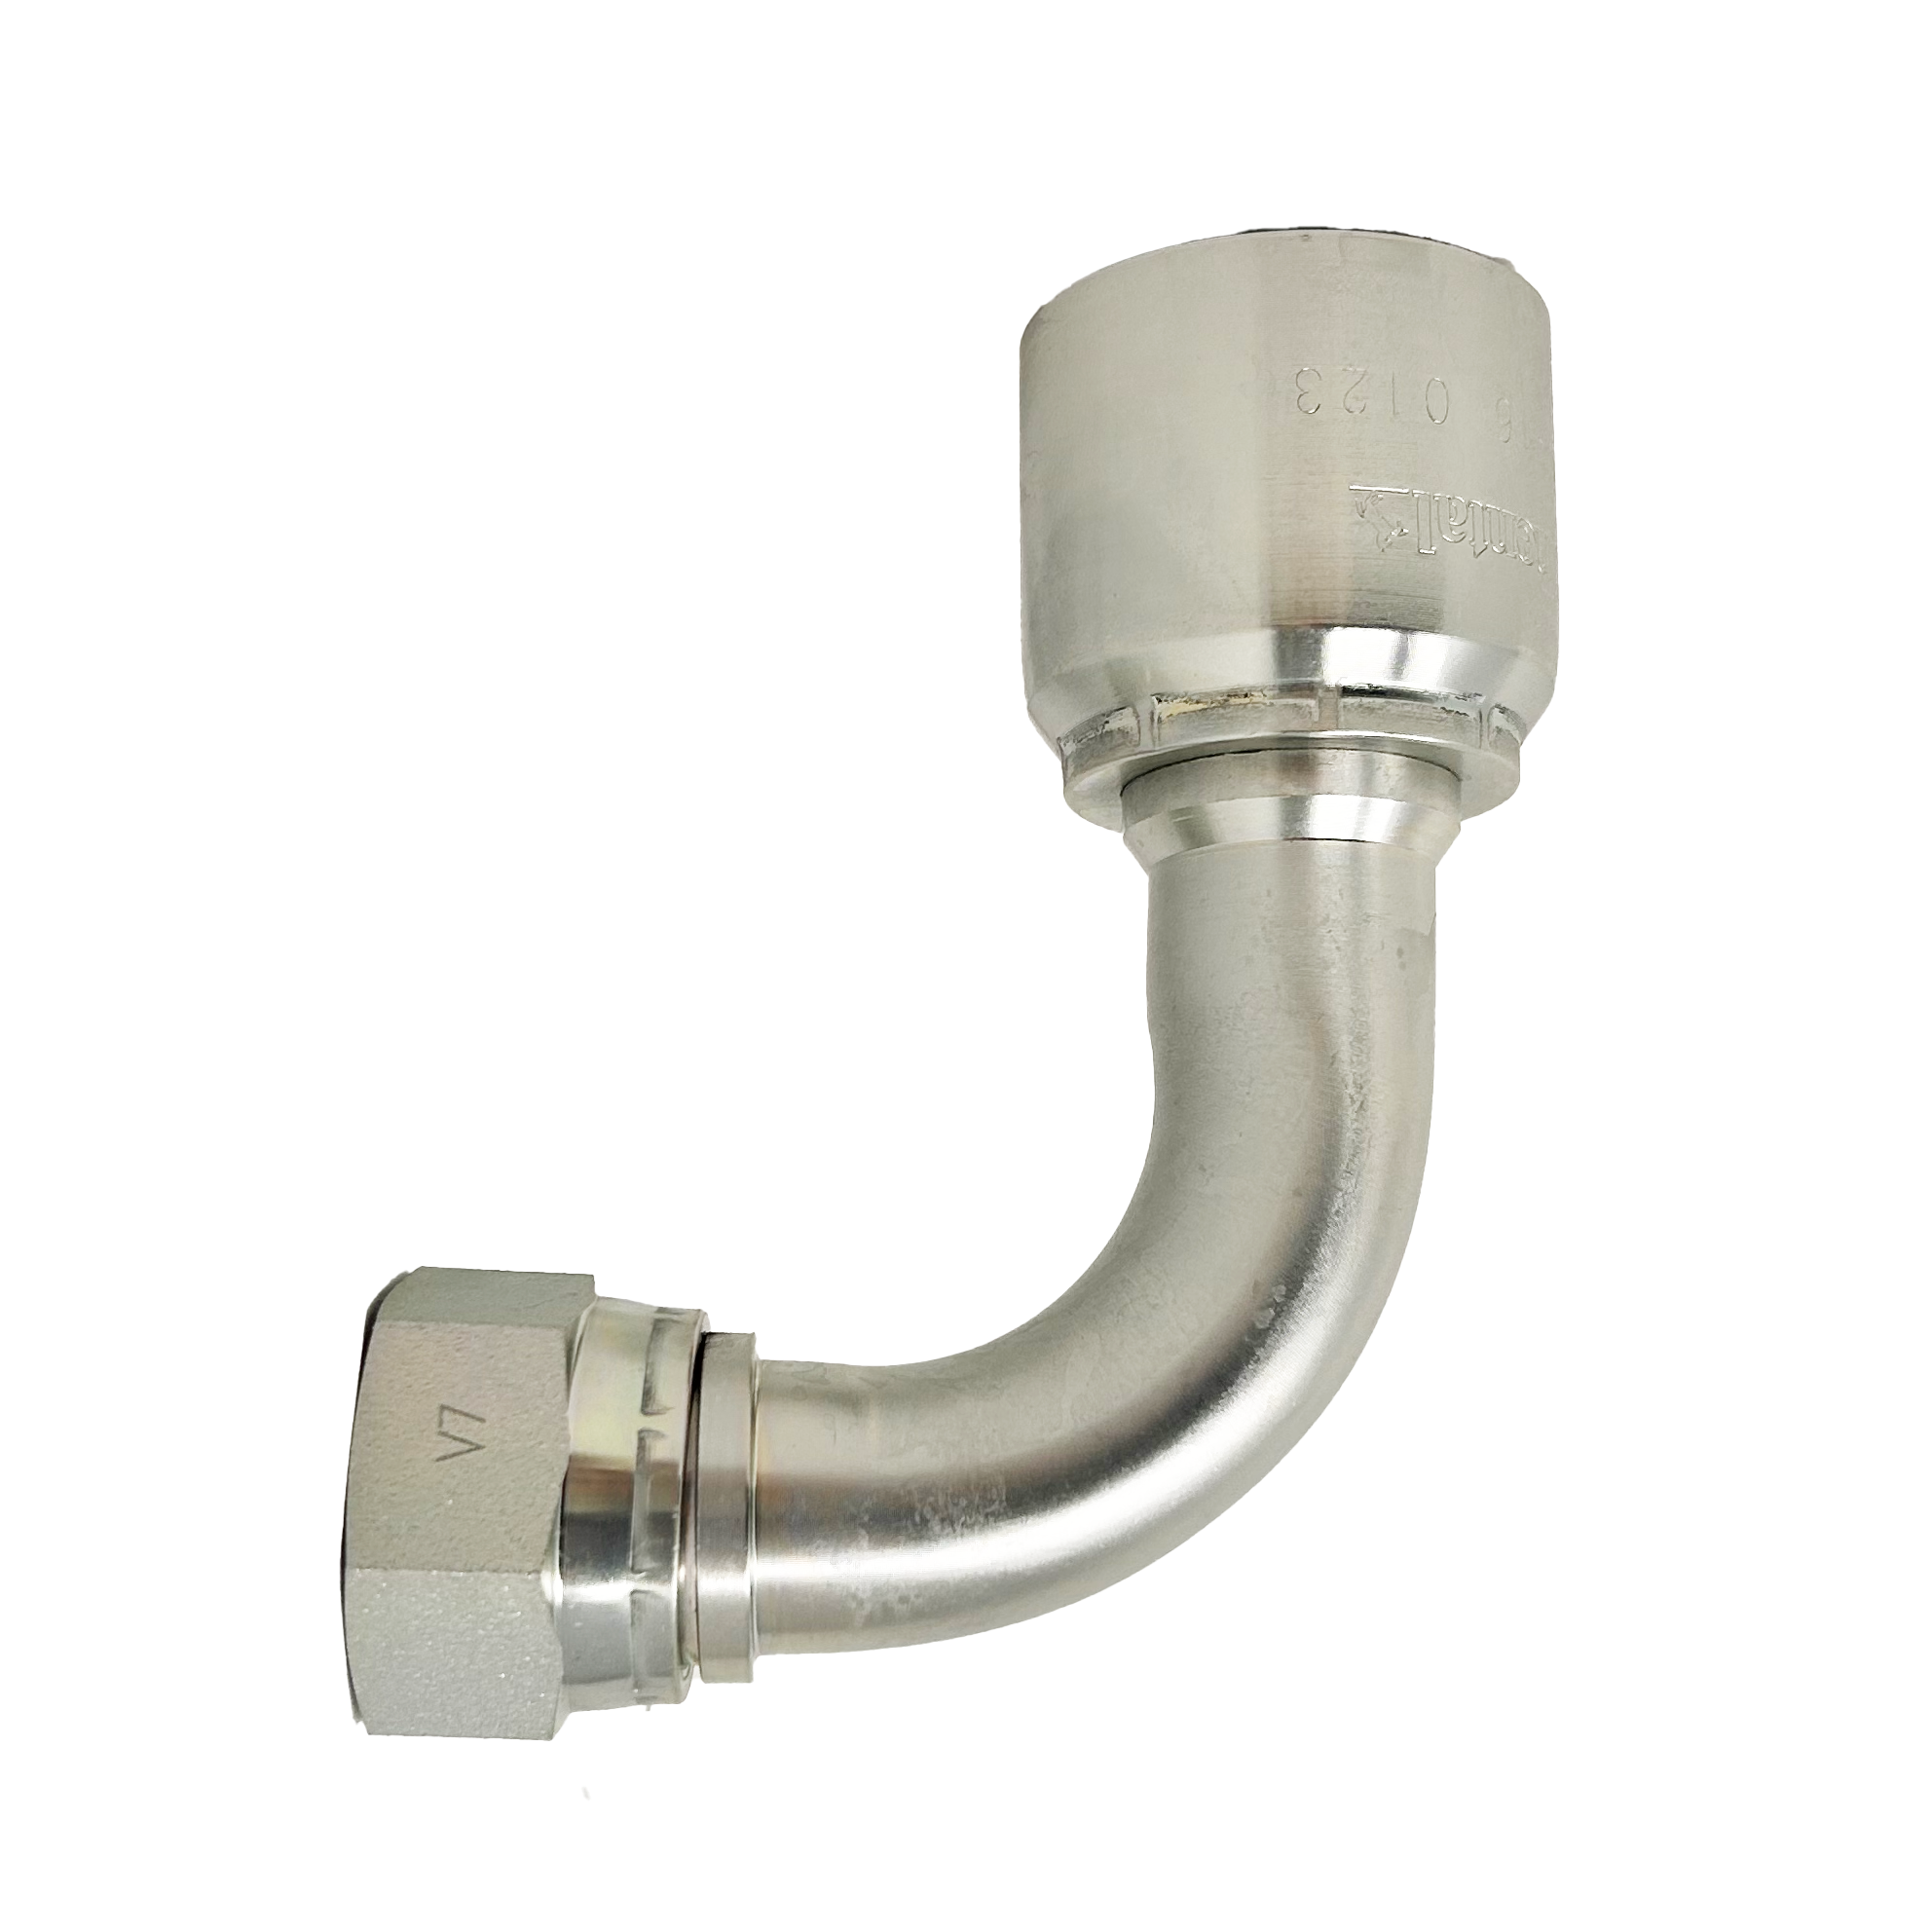 B2-JCFX90-0404: Continental Hose Fitting, 0.25 (1/4") Hose ID x 7/16-20 Female JIC, 90-Degree Swivel Connection